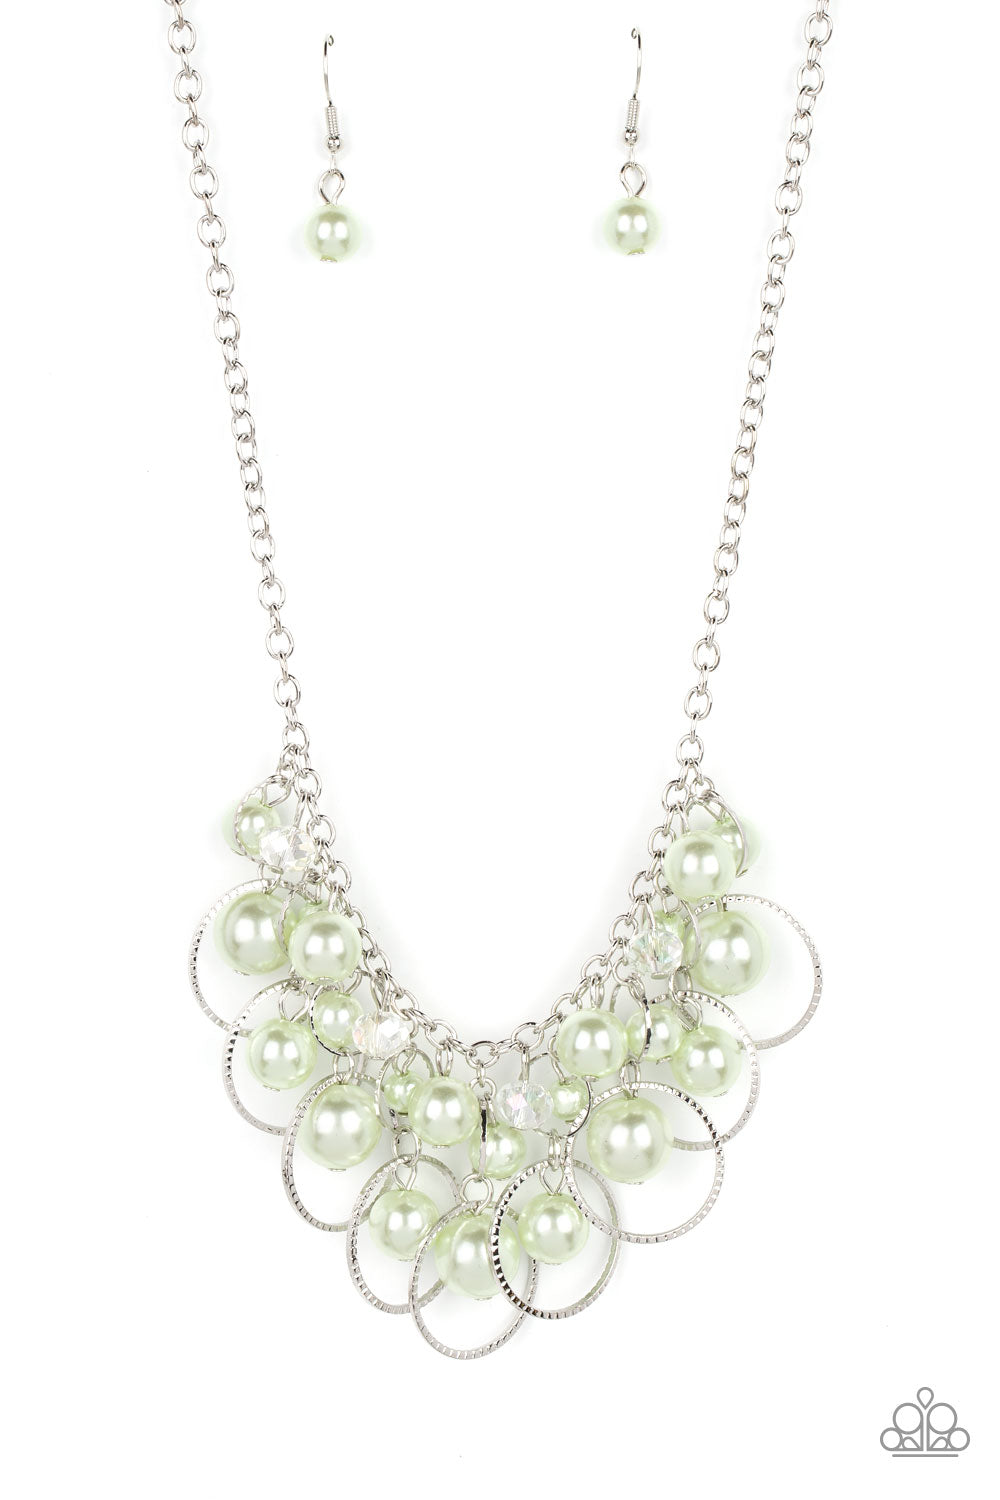 Ballroom Bliss Green Necklace Paparazzi Accessories. #P2RE-GRXX-240XX. Subscribe & Save.